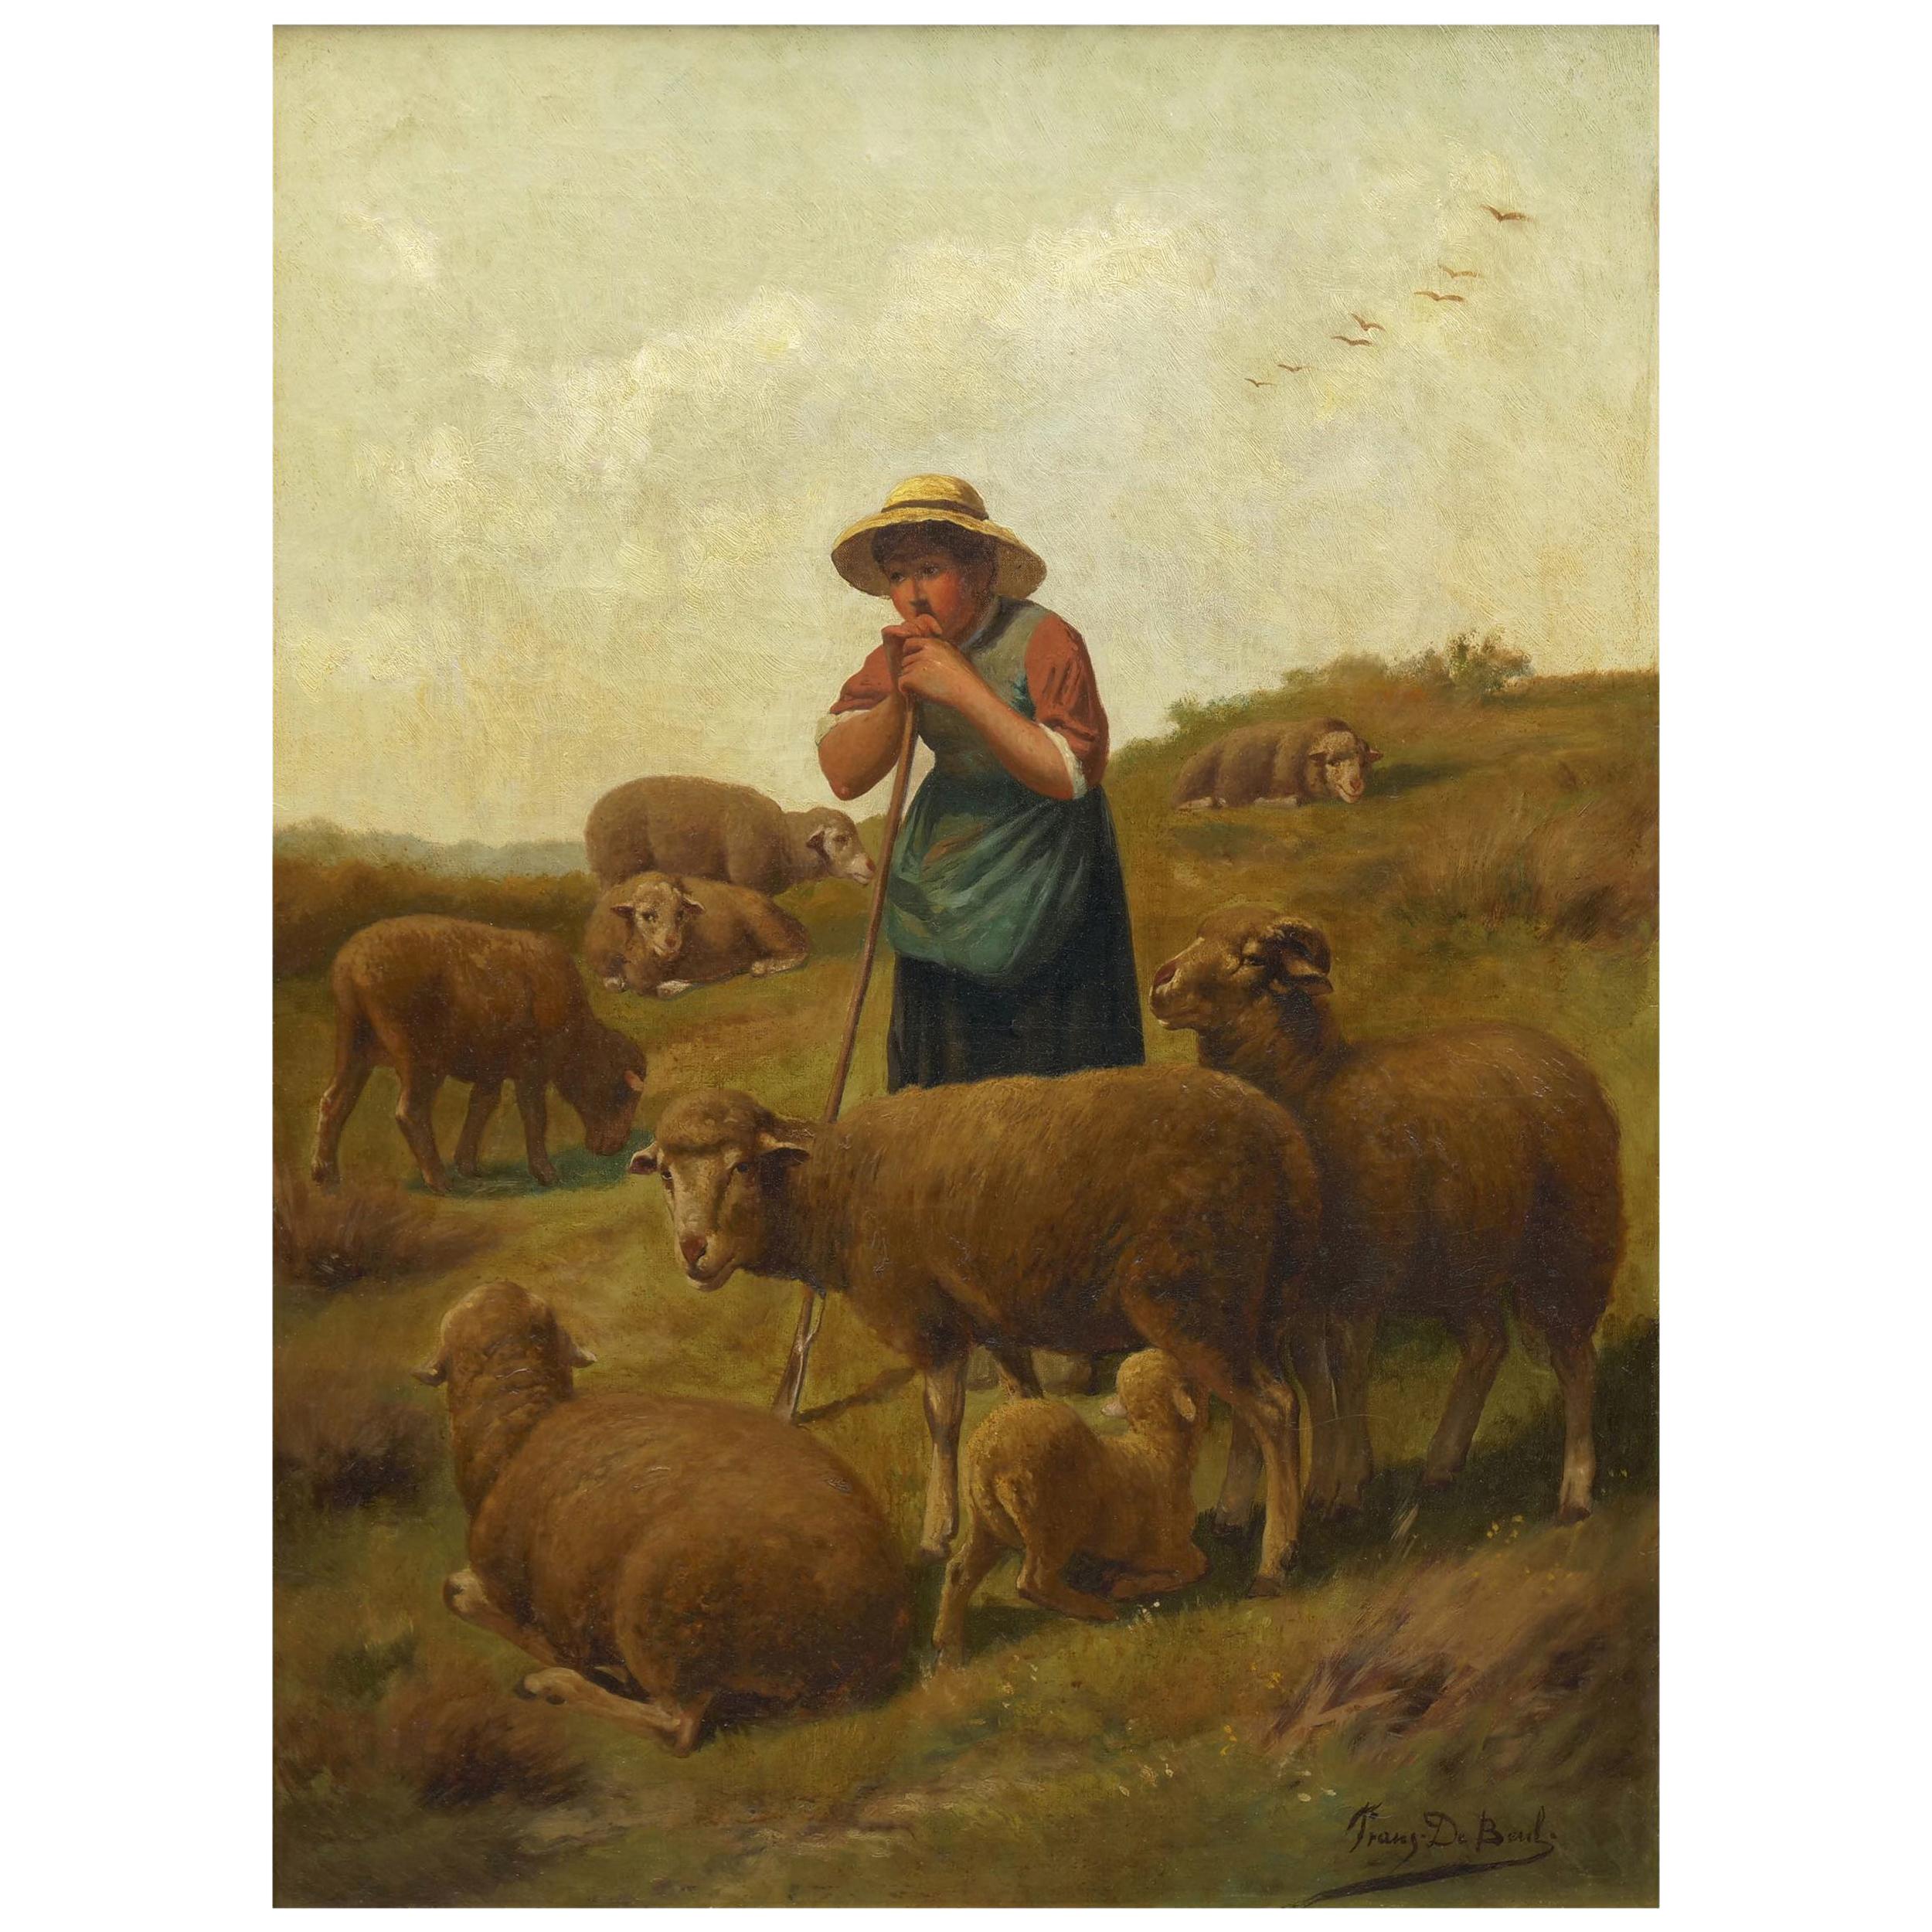 “Shepherdess and Her Sheep” Antique Oil Painting Signed Franz de Beul, 19th C